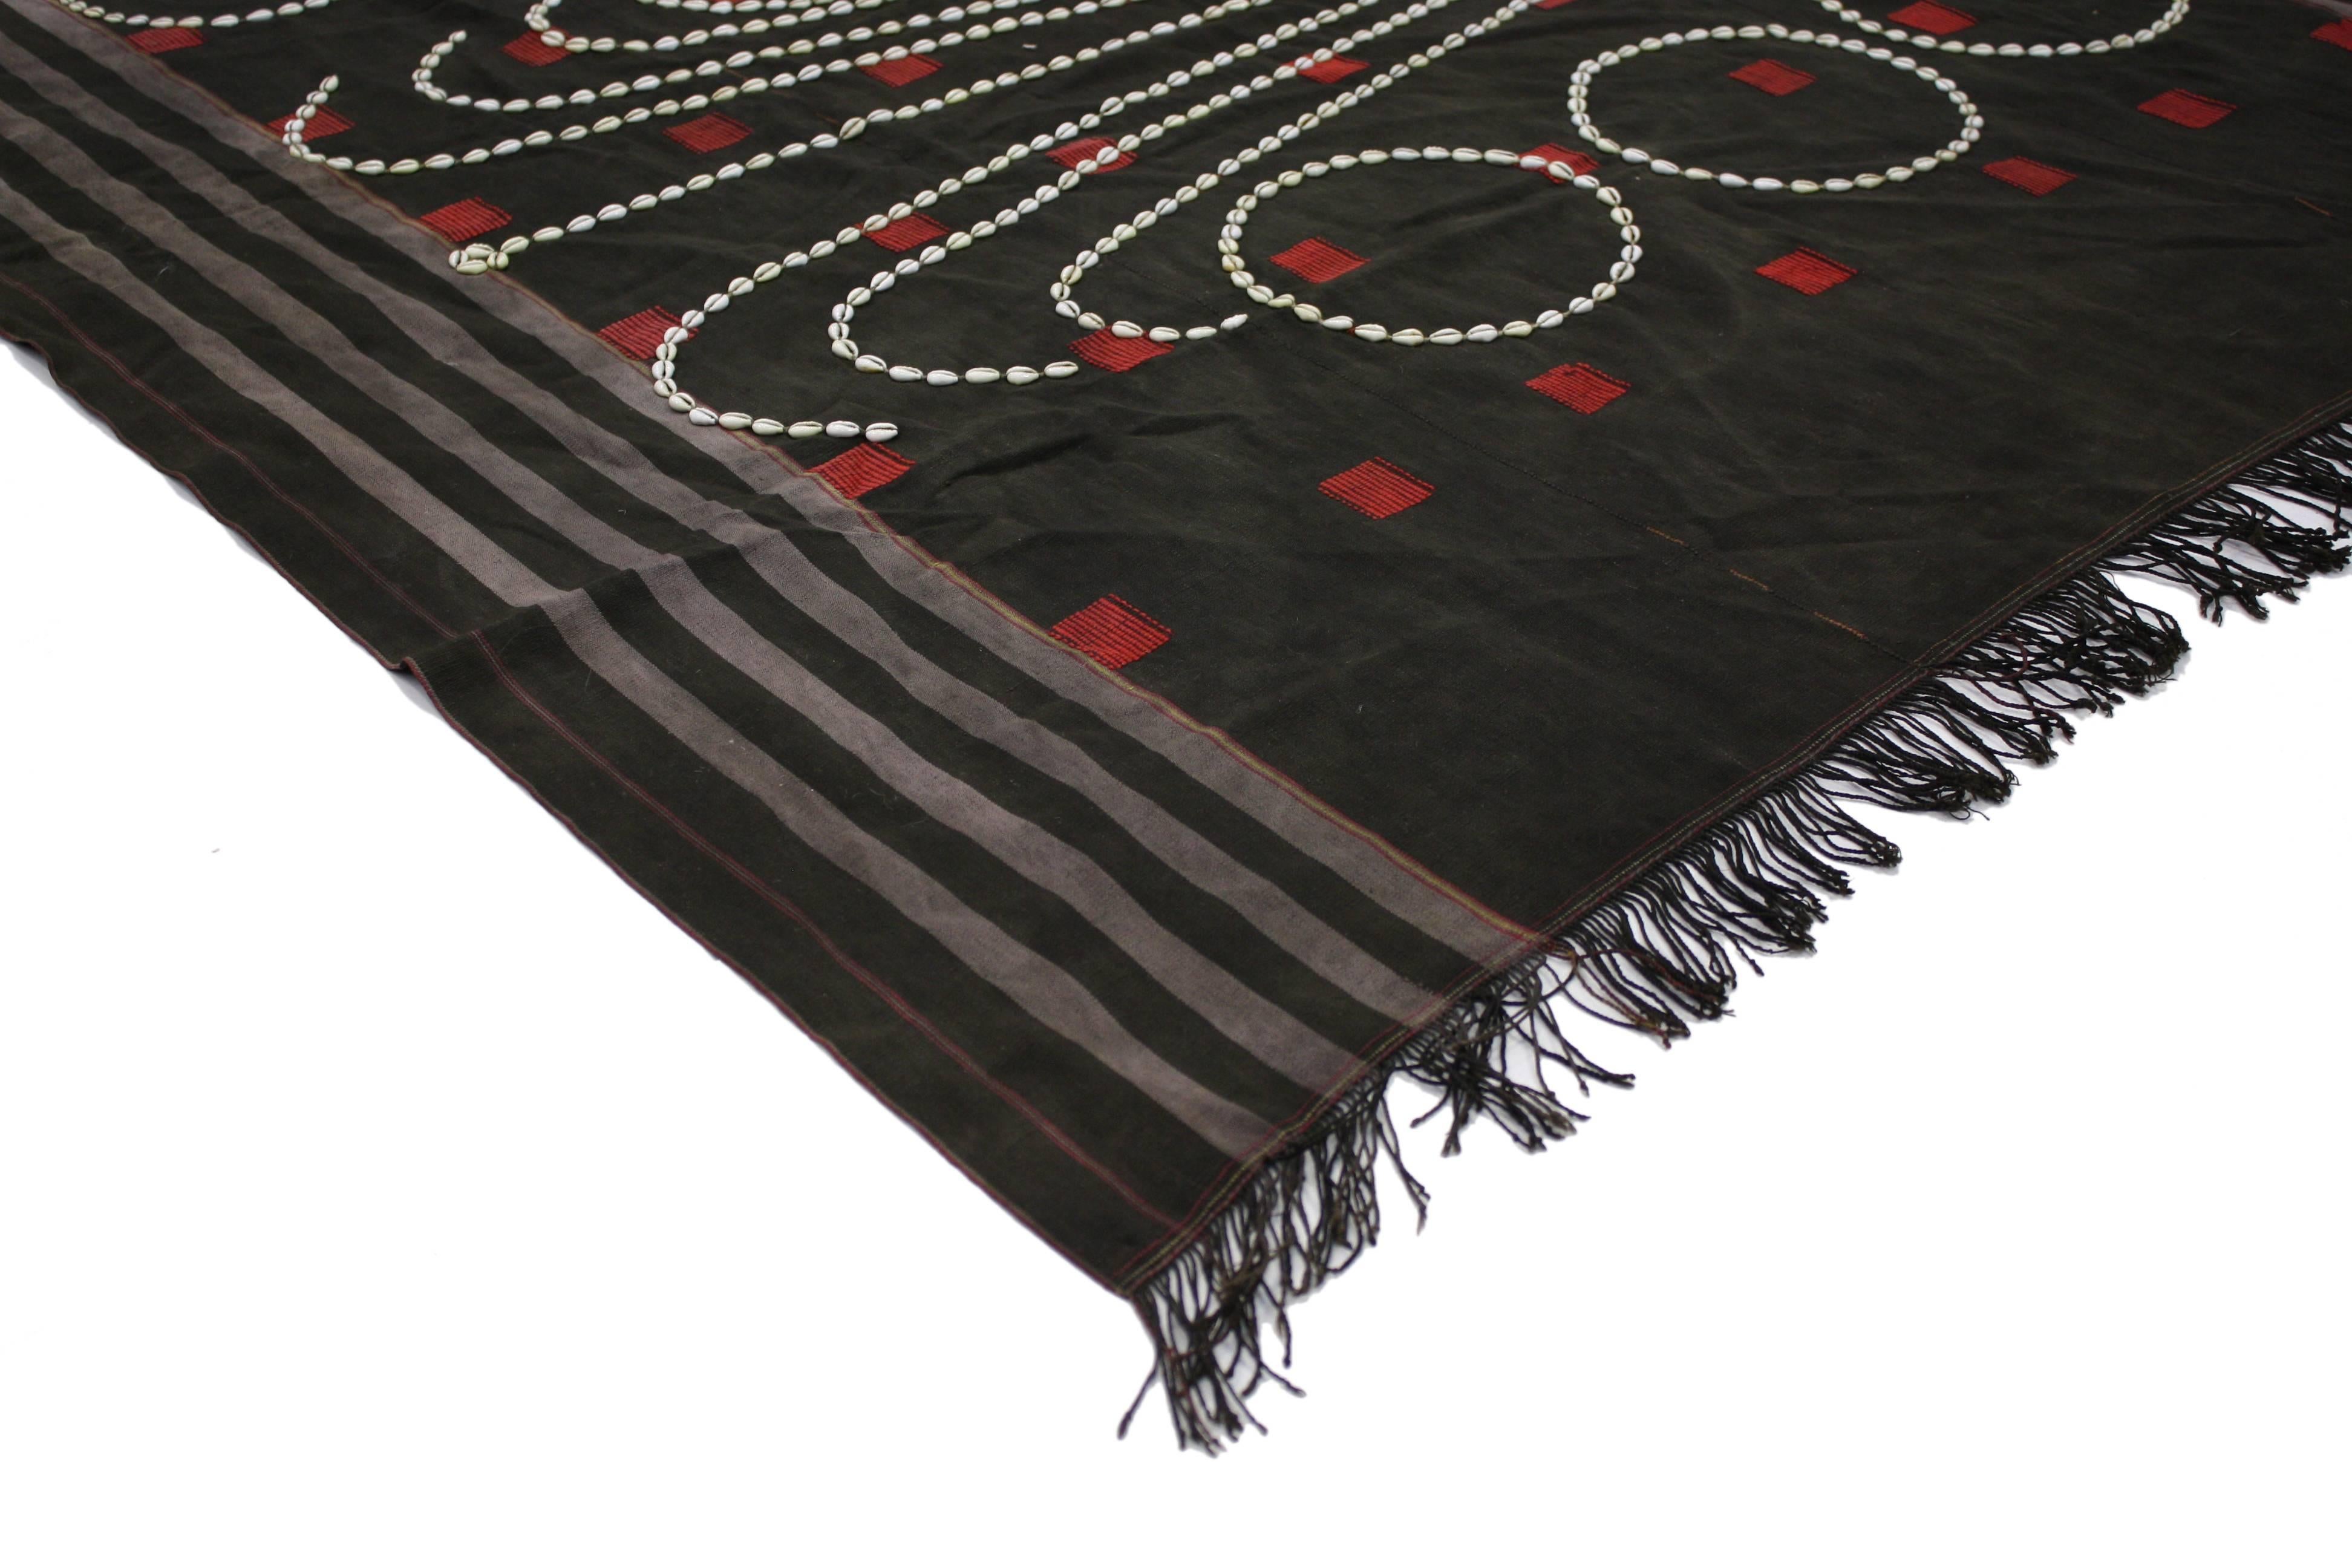 76646, antique Sangtam Naga Tribe Supong Warrior Shawl with Cowrie shell circles. This antique naga warrior Supong shawl was most likely worn by headman (headhunter) from the Sangtam Tribe of Nagaland. This ceremonial body cloth was honored and very